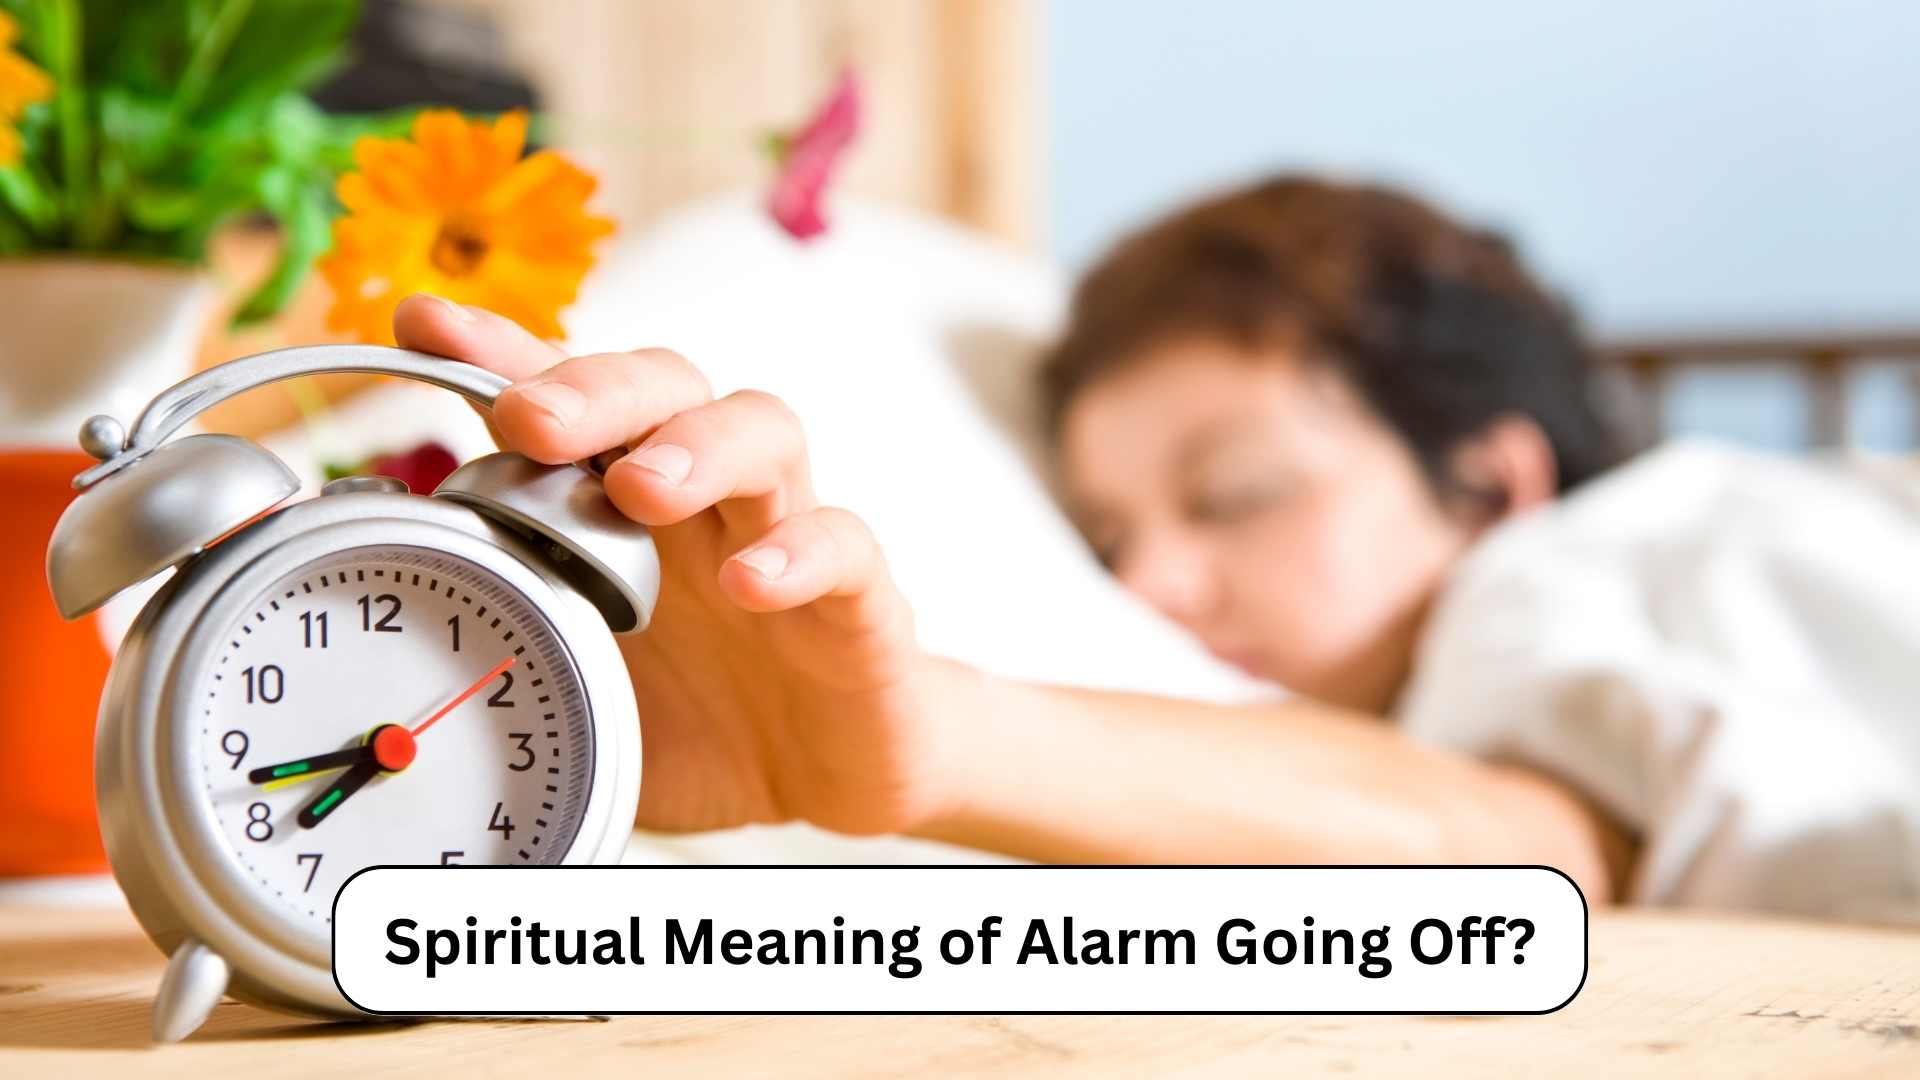 Spiritual Meaning of Alarm Going Off